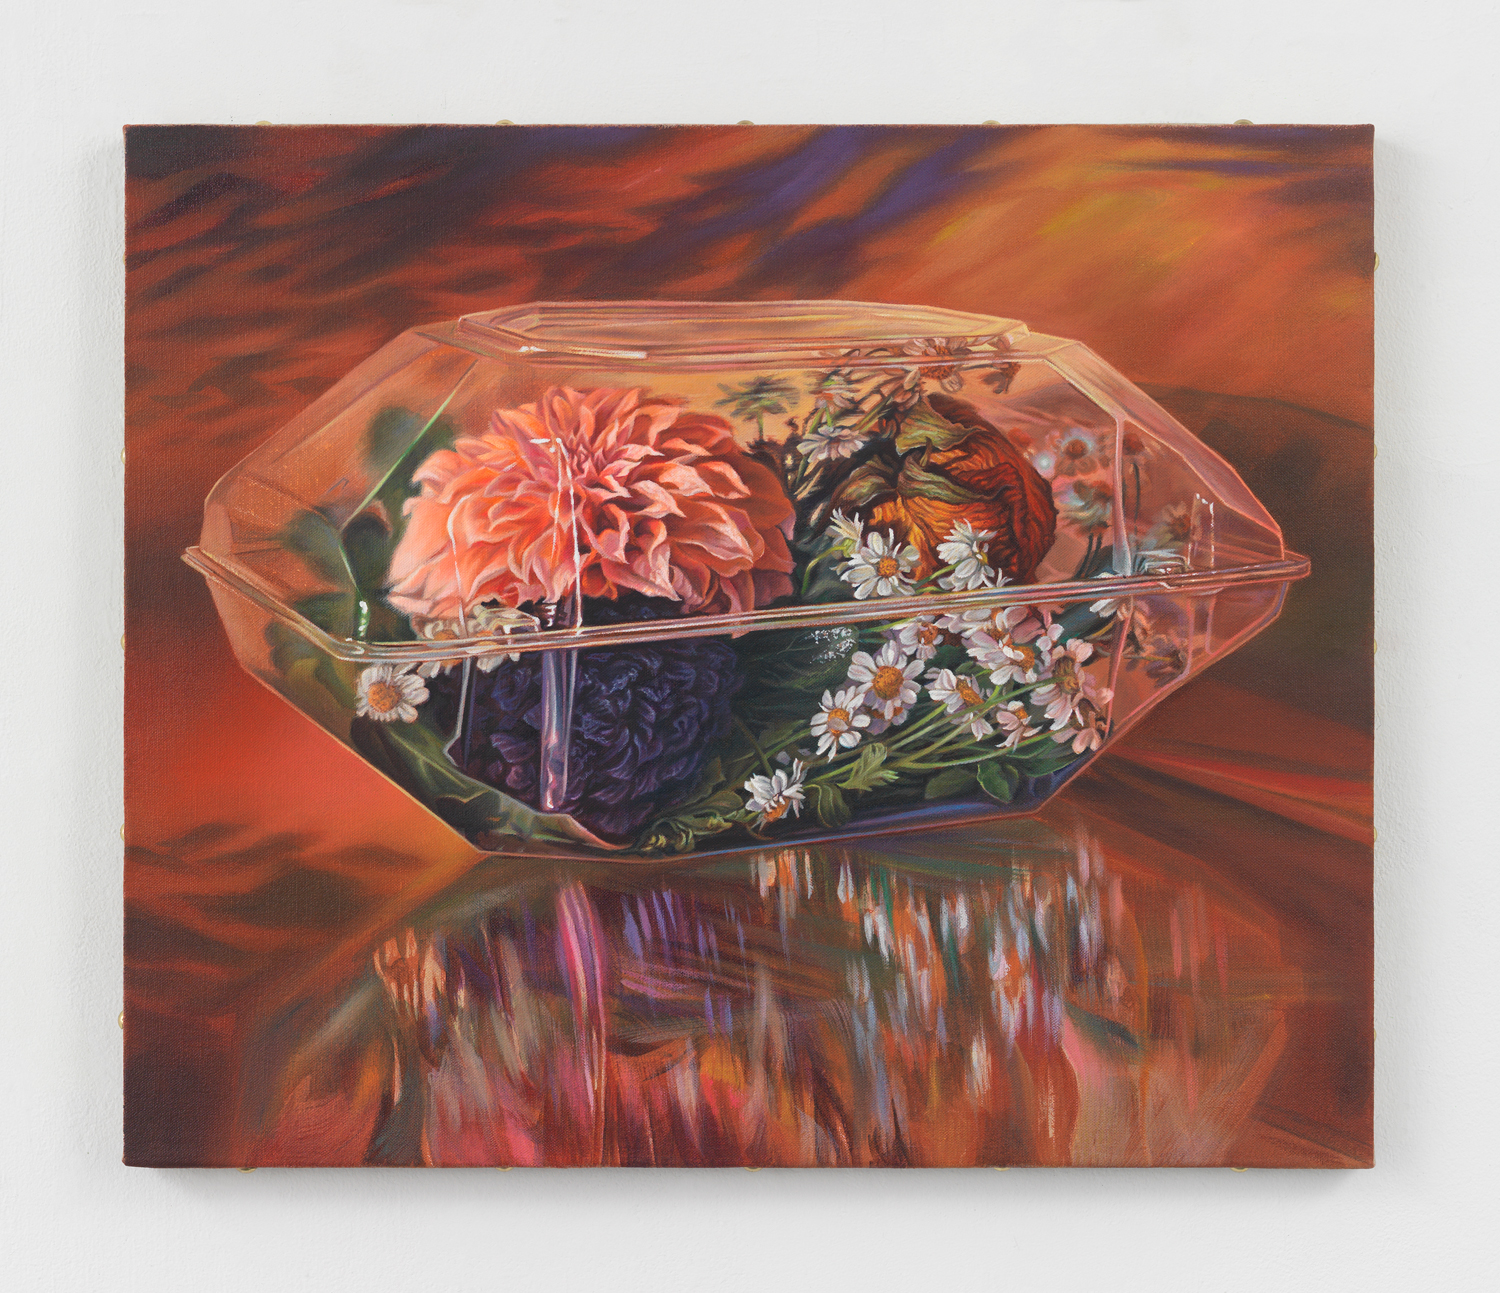 Chason Matthams, Corsage (red/brown), 2022, Oil on linen over panel, 20 x 24 in.